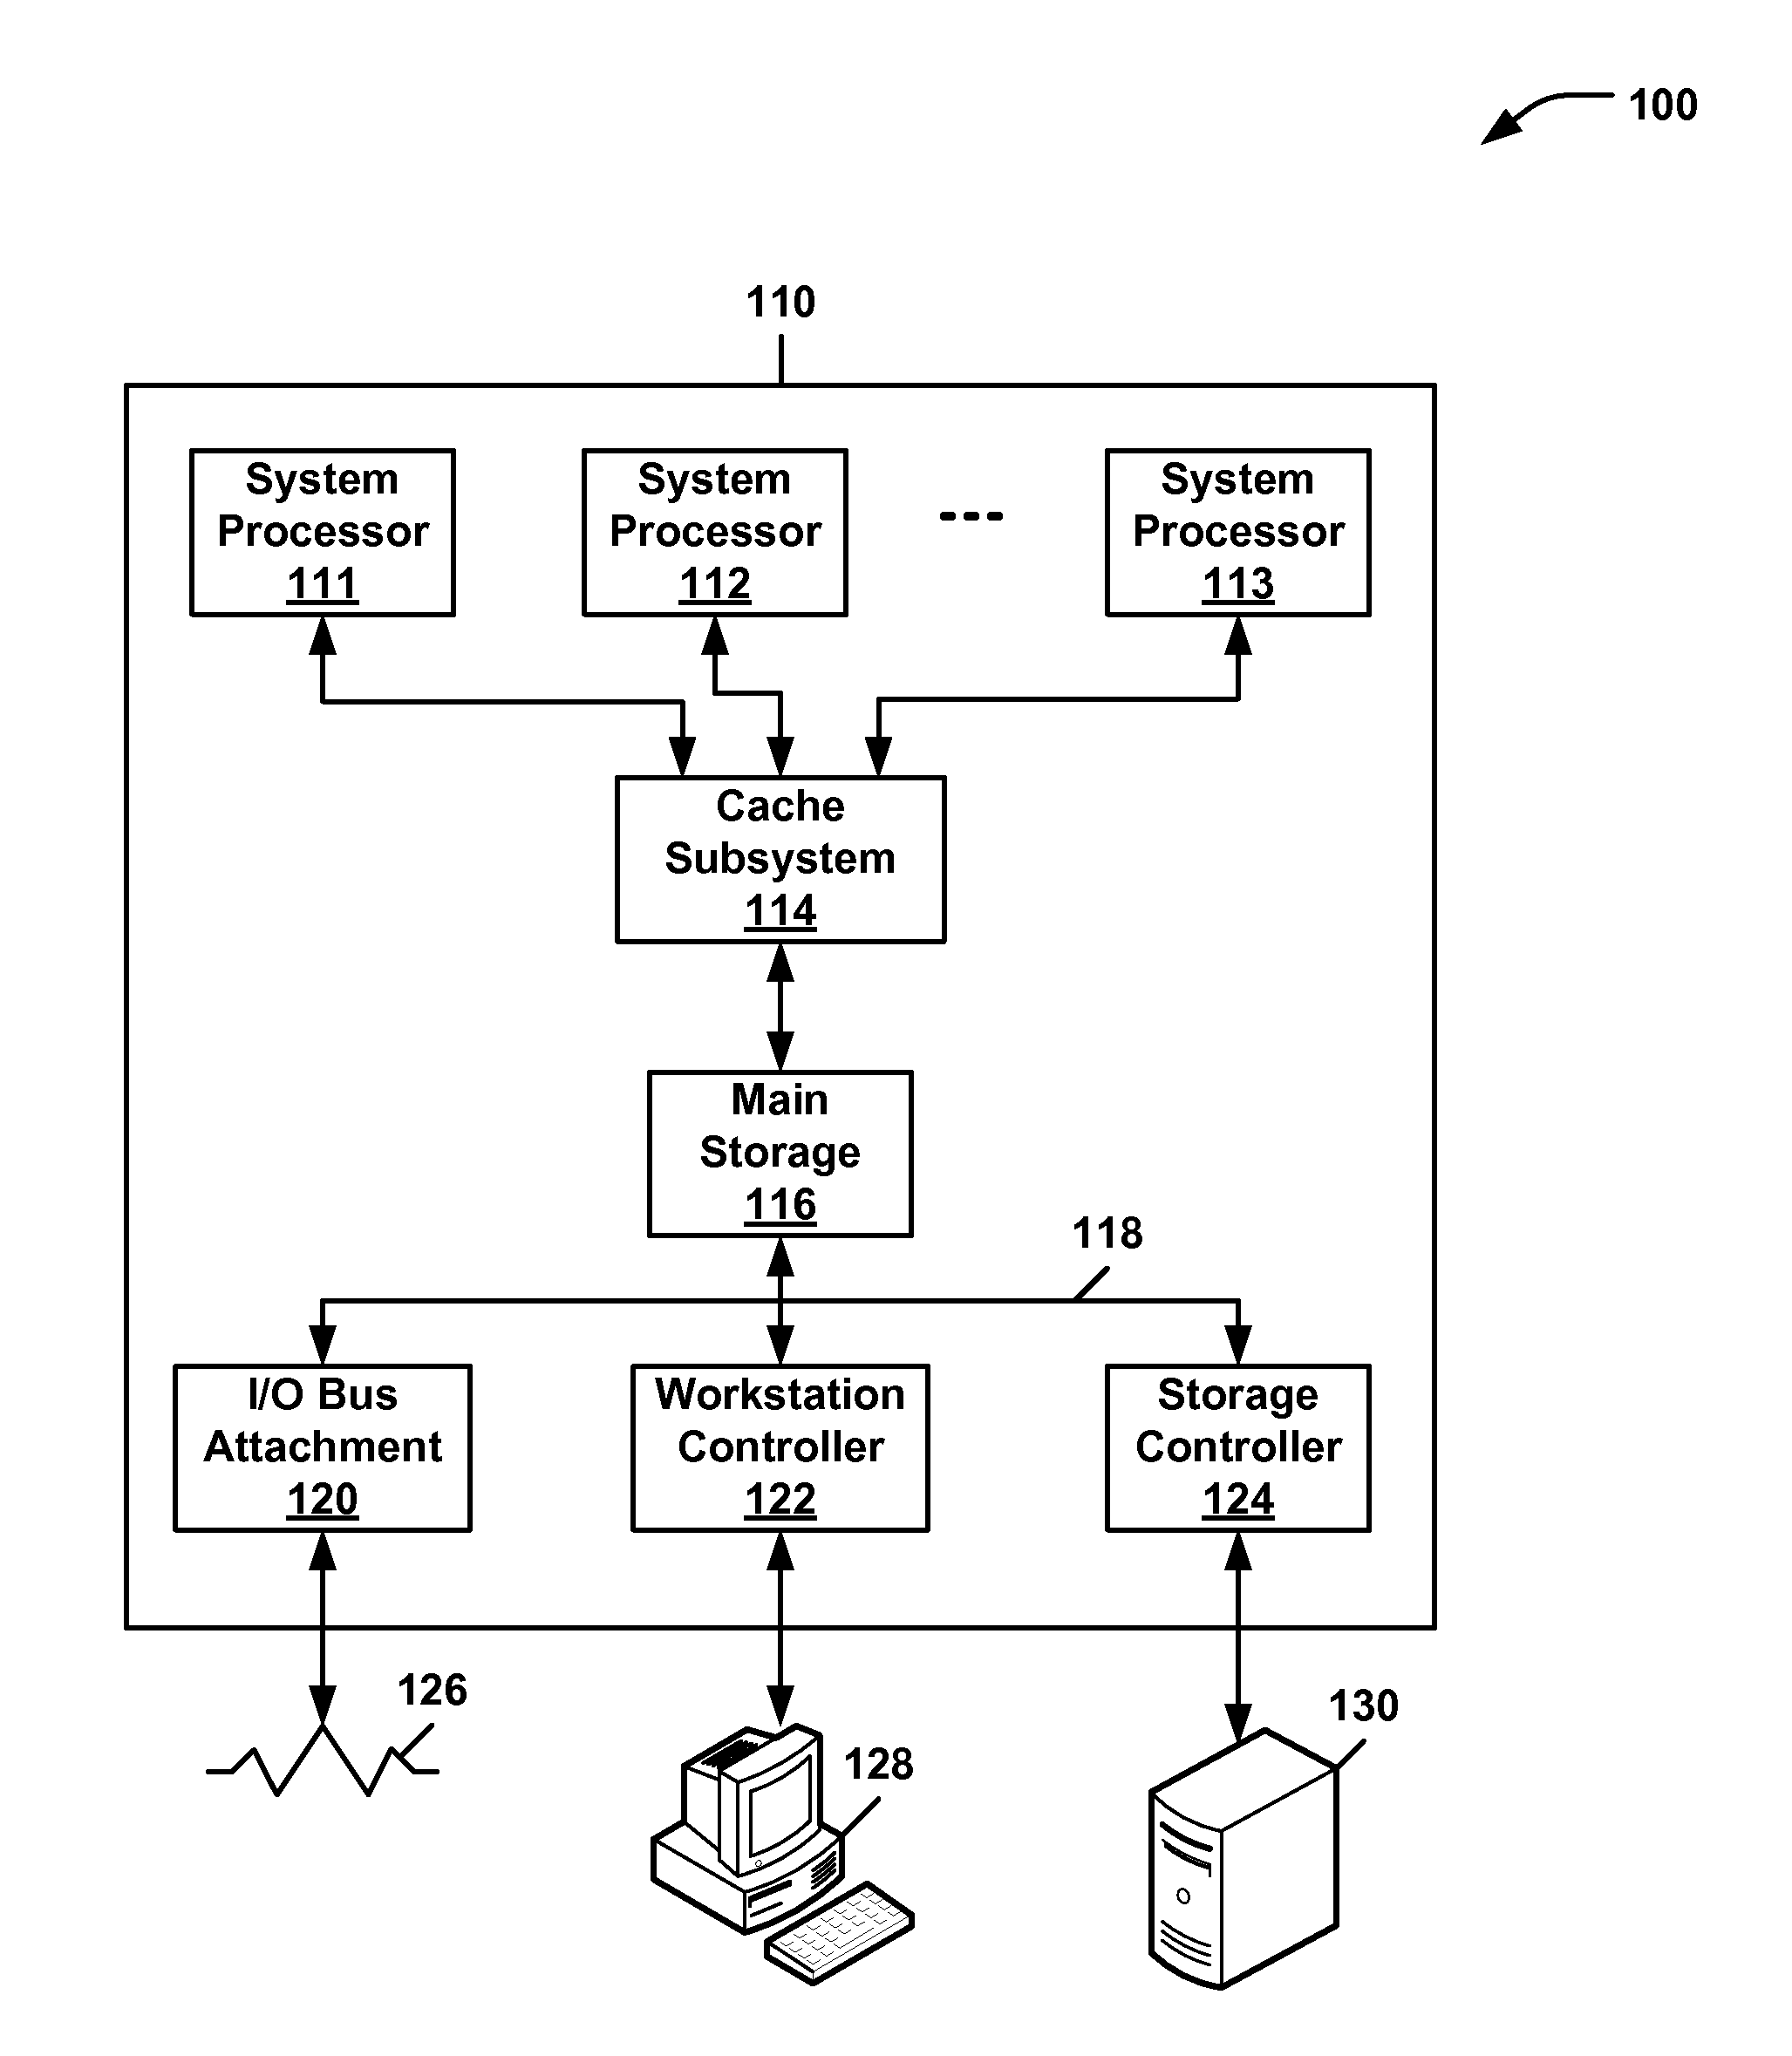 Error correction based on thermal profile of flash memory device